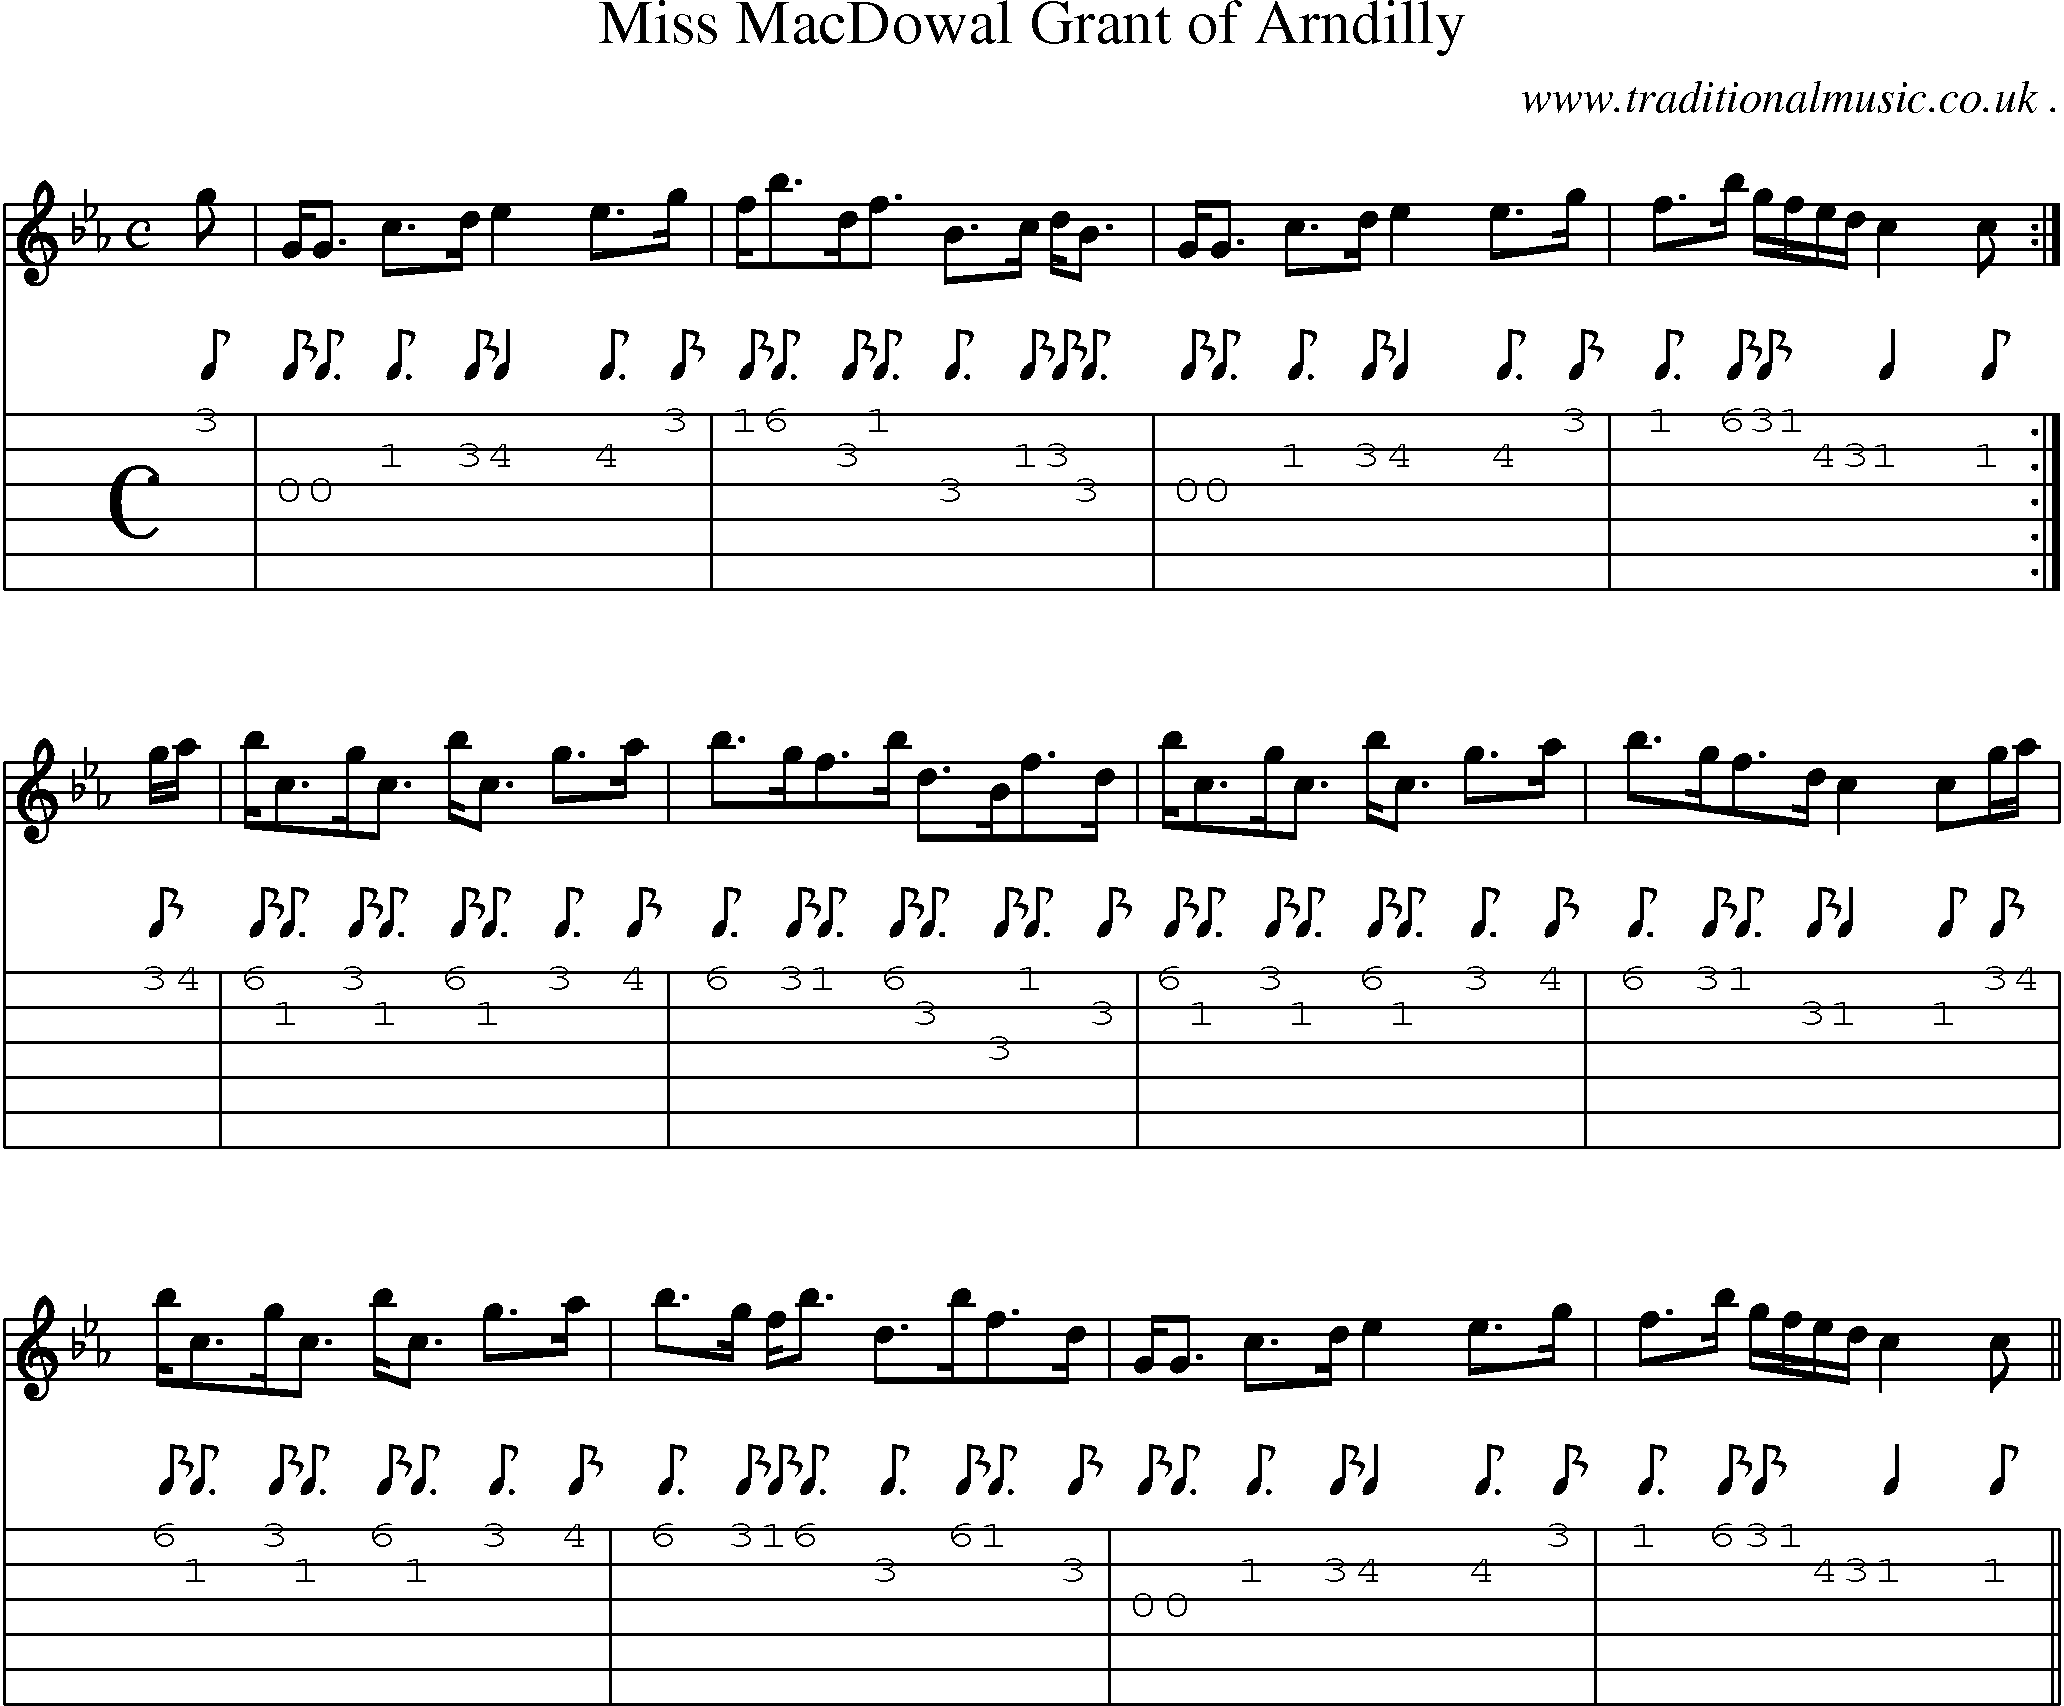 Sheet-music  score, Chords and Guitar Tabs for Miss Macdowal Grant Of Arndilly